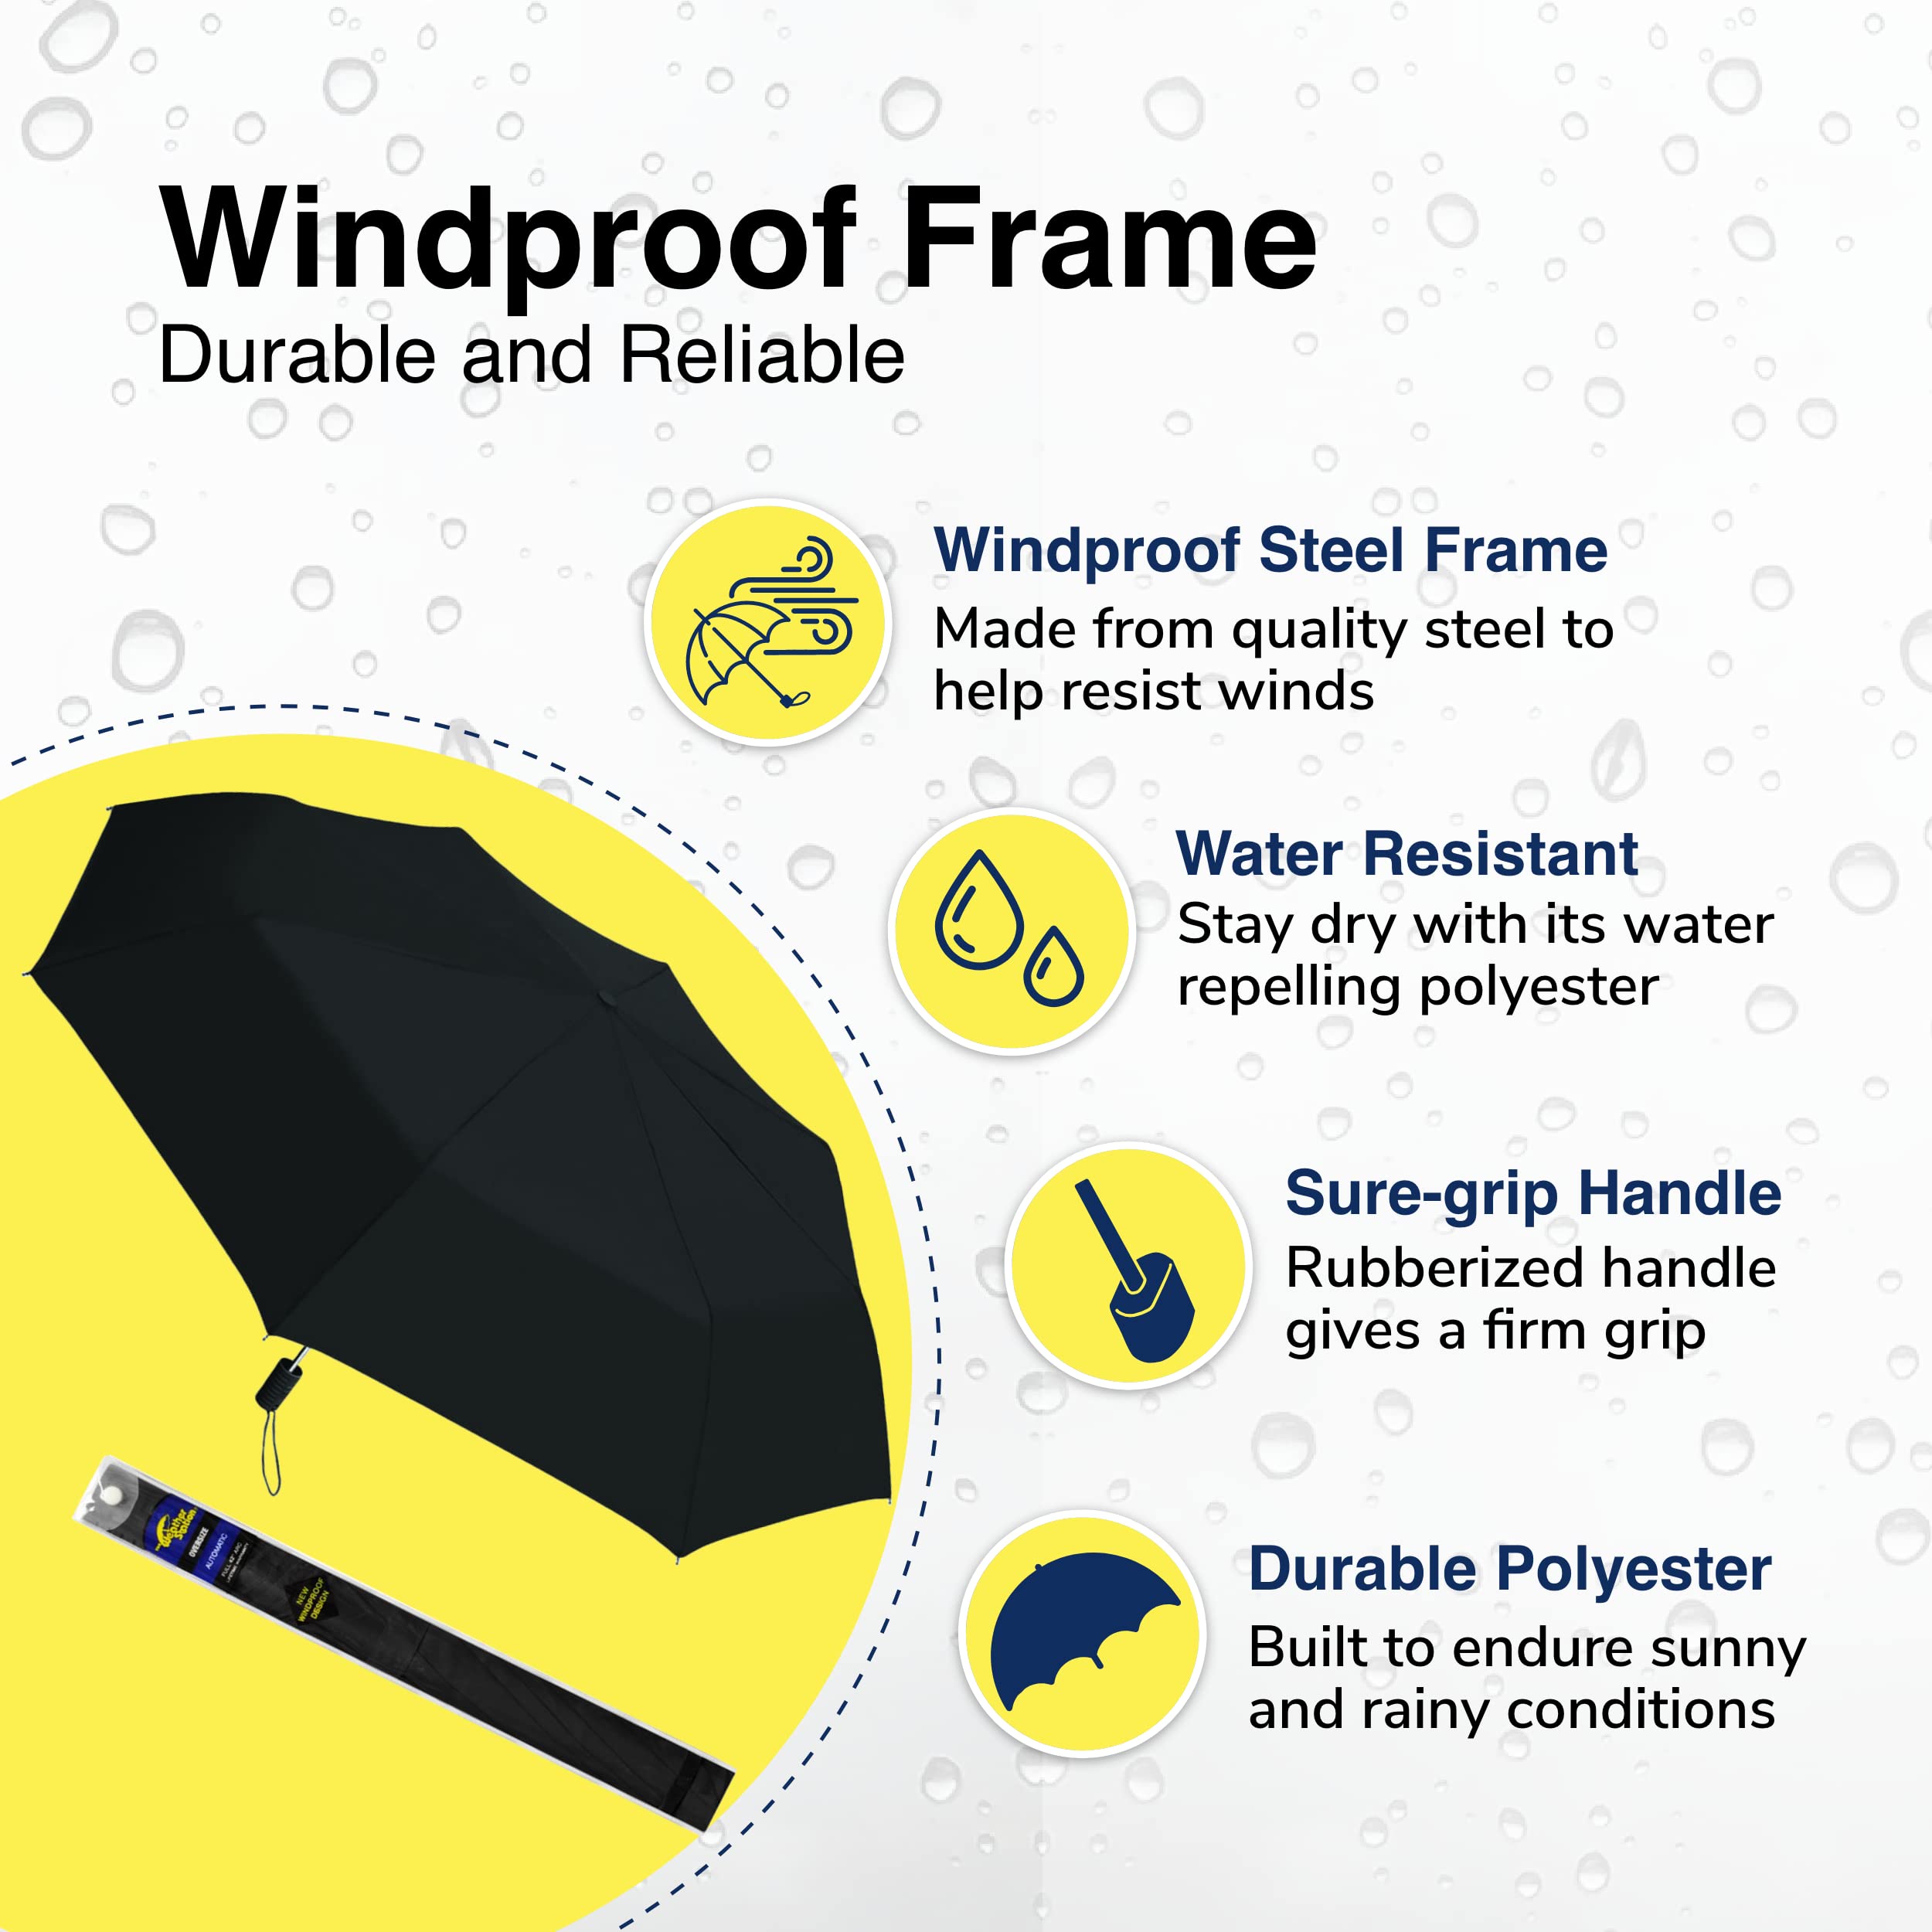 Weather Station Rain Umbrella, Automatic Folding Umbrella, Windproof, Lightweight, and Packable for Travel, Full 42 Inch Arc, Black